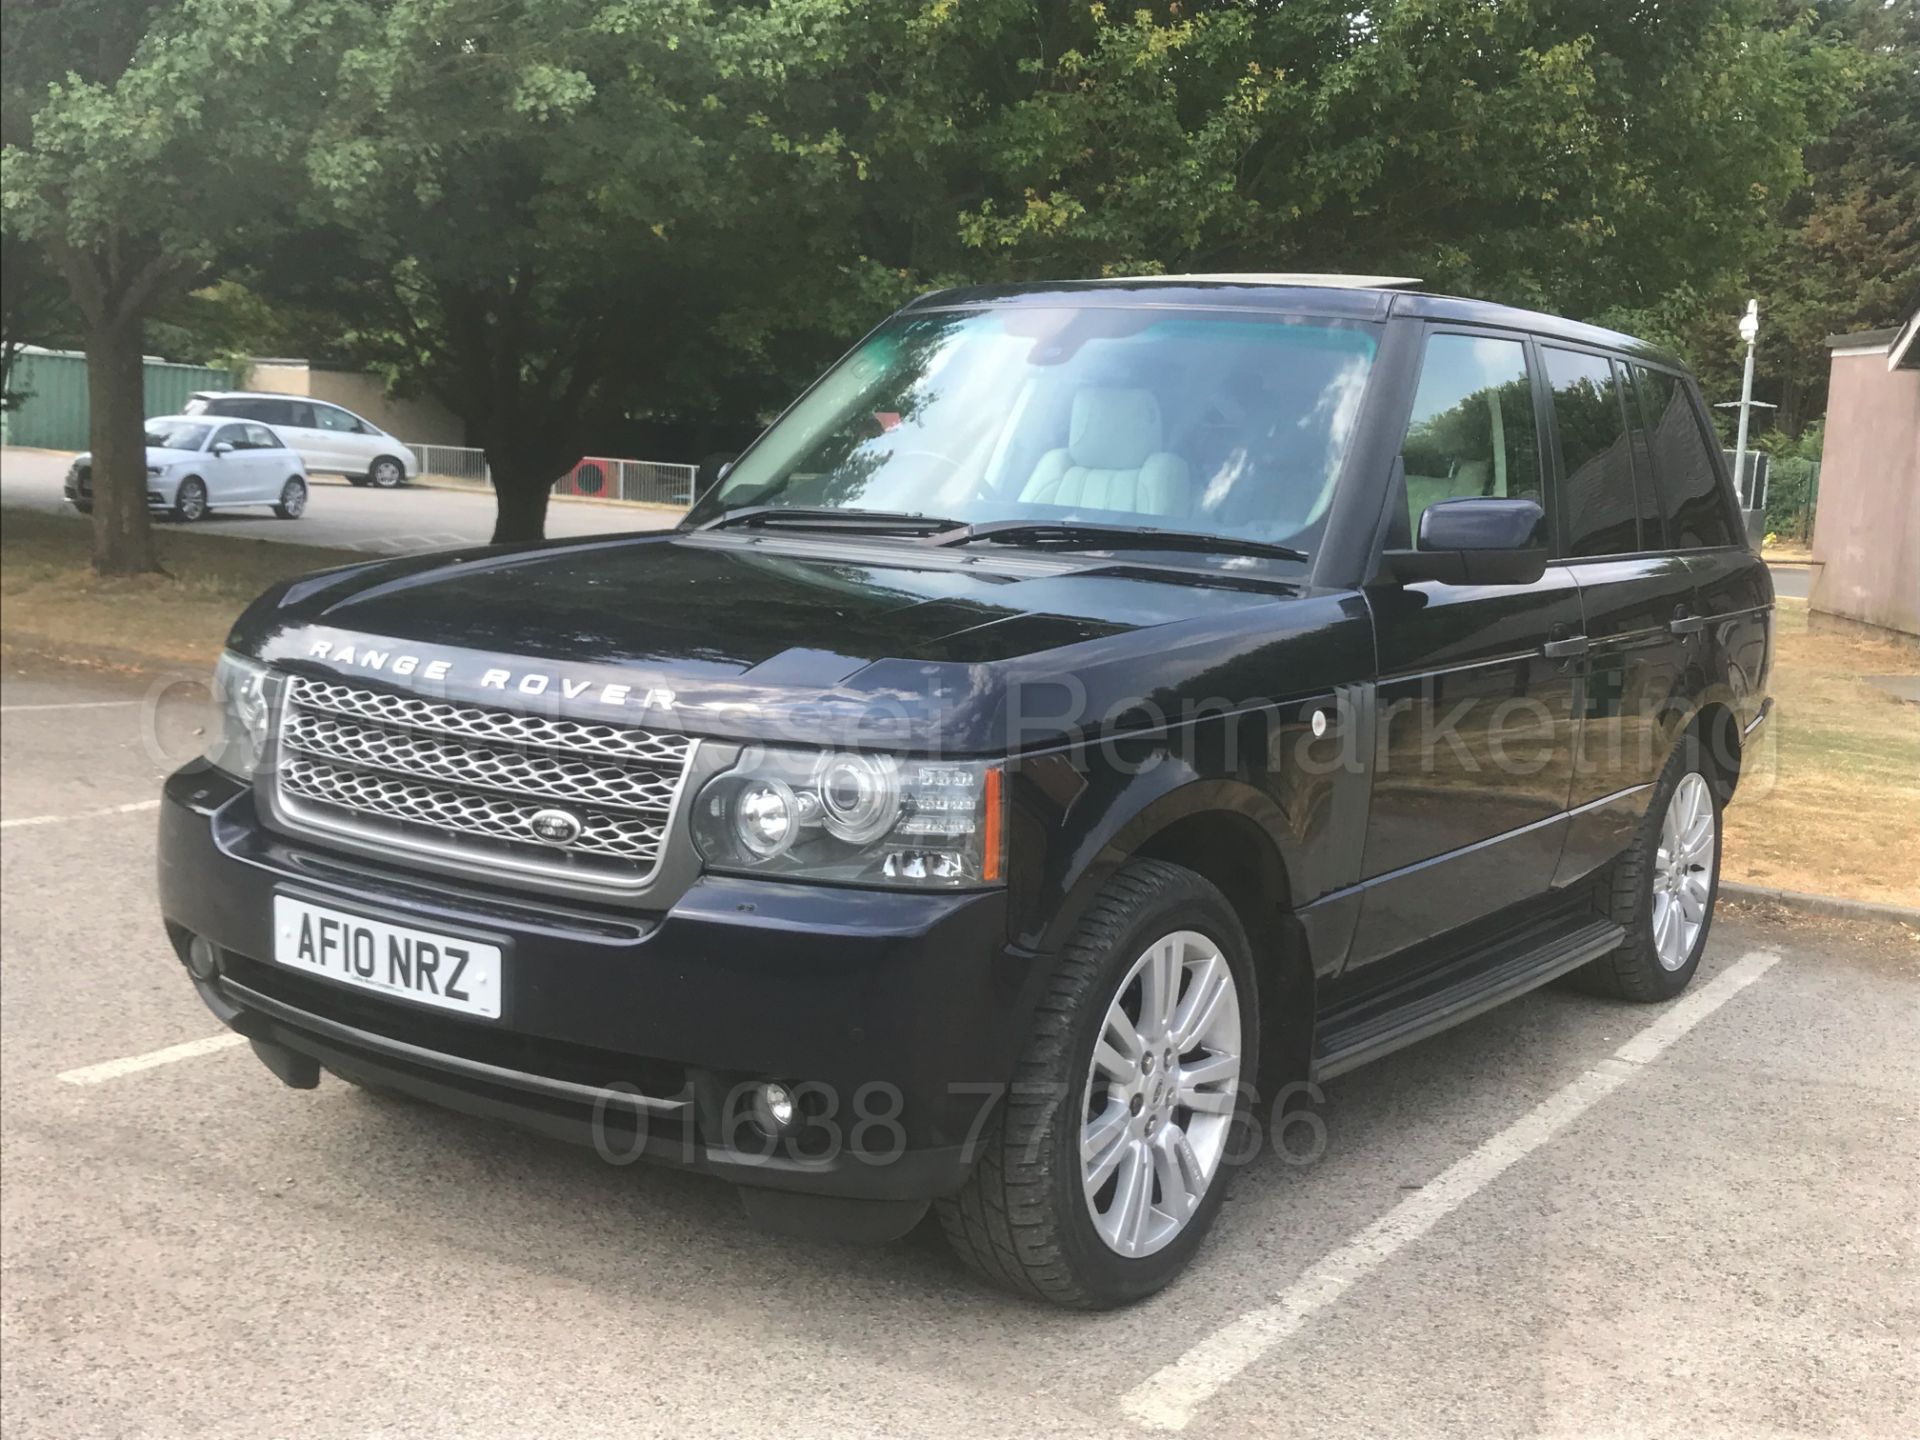 (On Sale) RANGE ROVER VOGUE **SE EDITION** (2010 - FACELIFT EDITION) 'TDV8 - 268 BHP - AUTO' **WOW** - Image 4 of 62